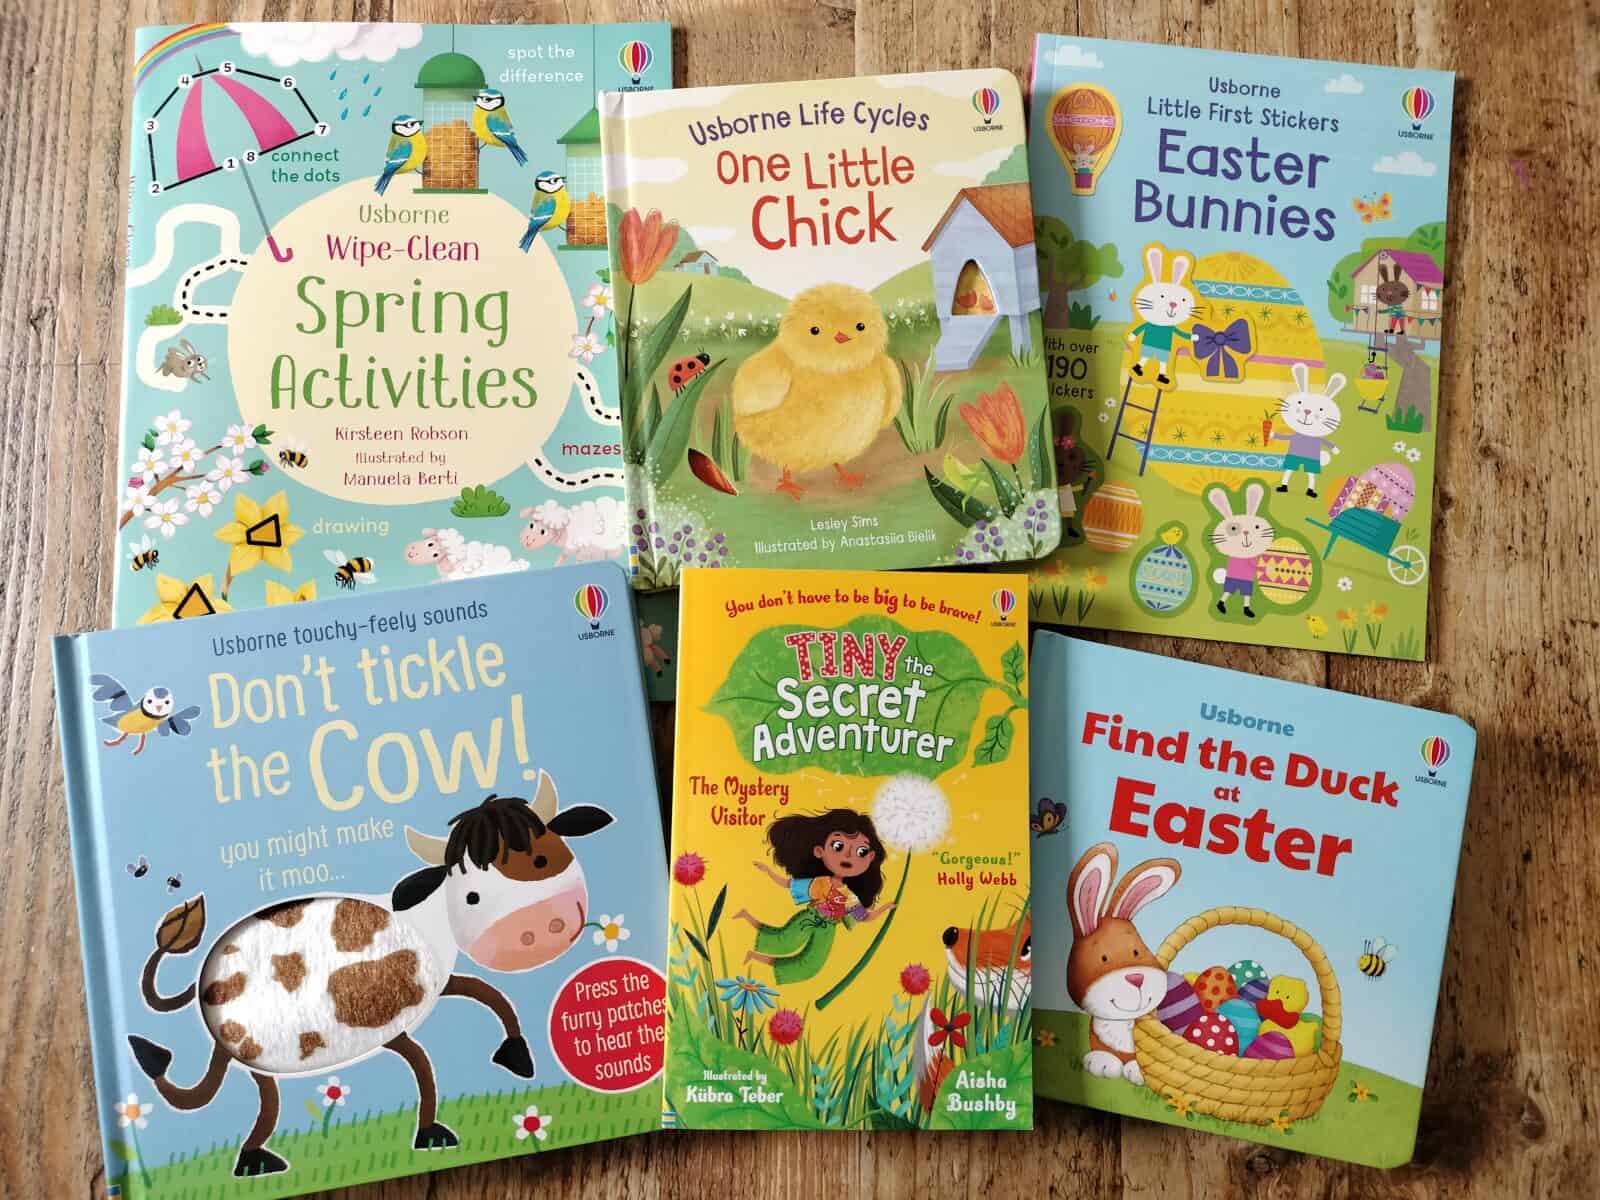 Set of 6 books about Spring and Easter from Usborne books laid out cover up on a wooden table.